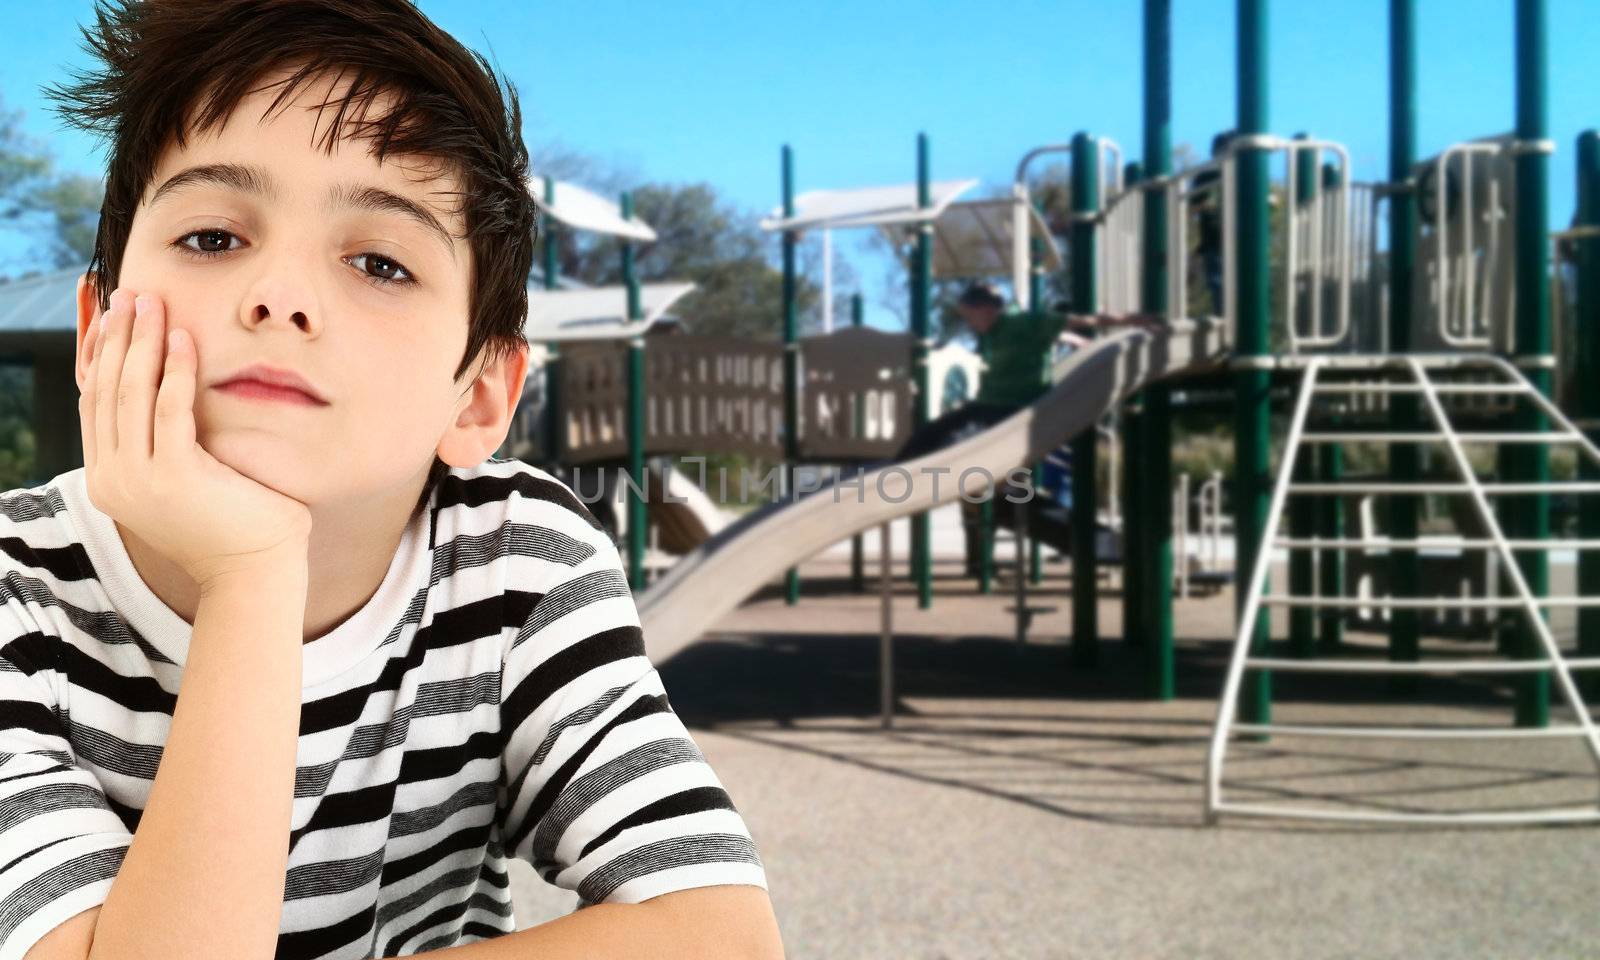 Handsome young boy child bored and waiting at park playground.